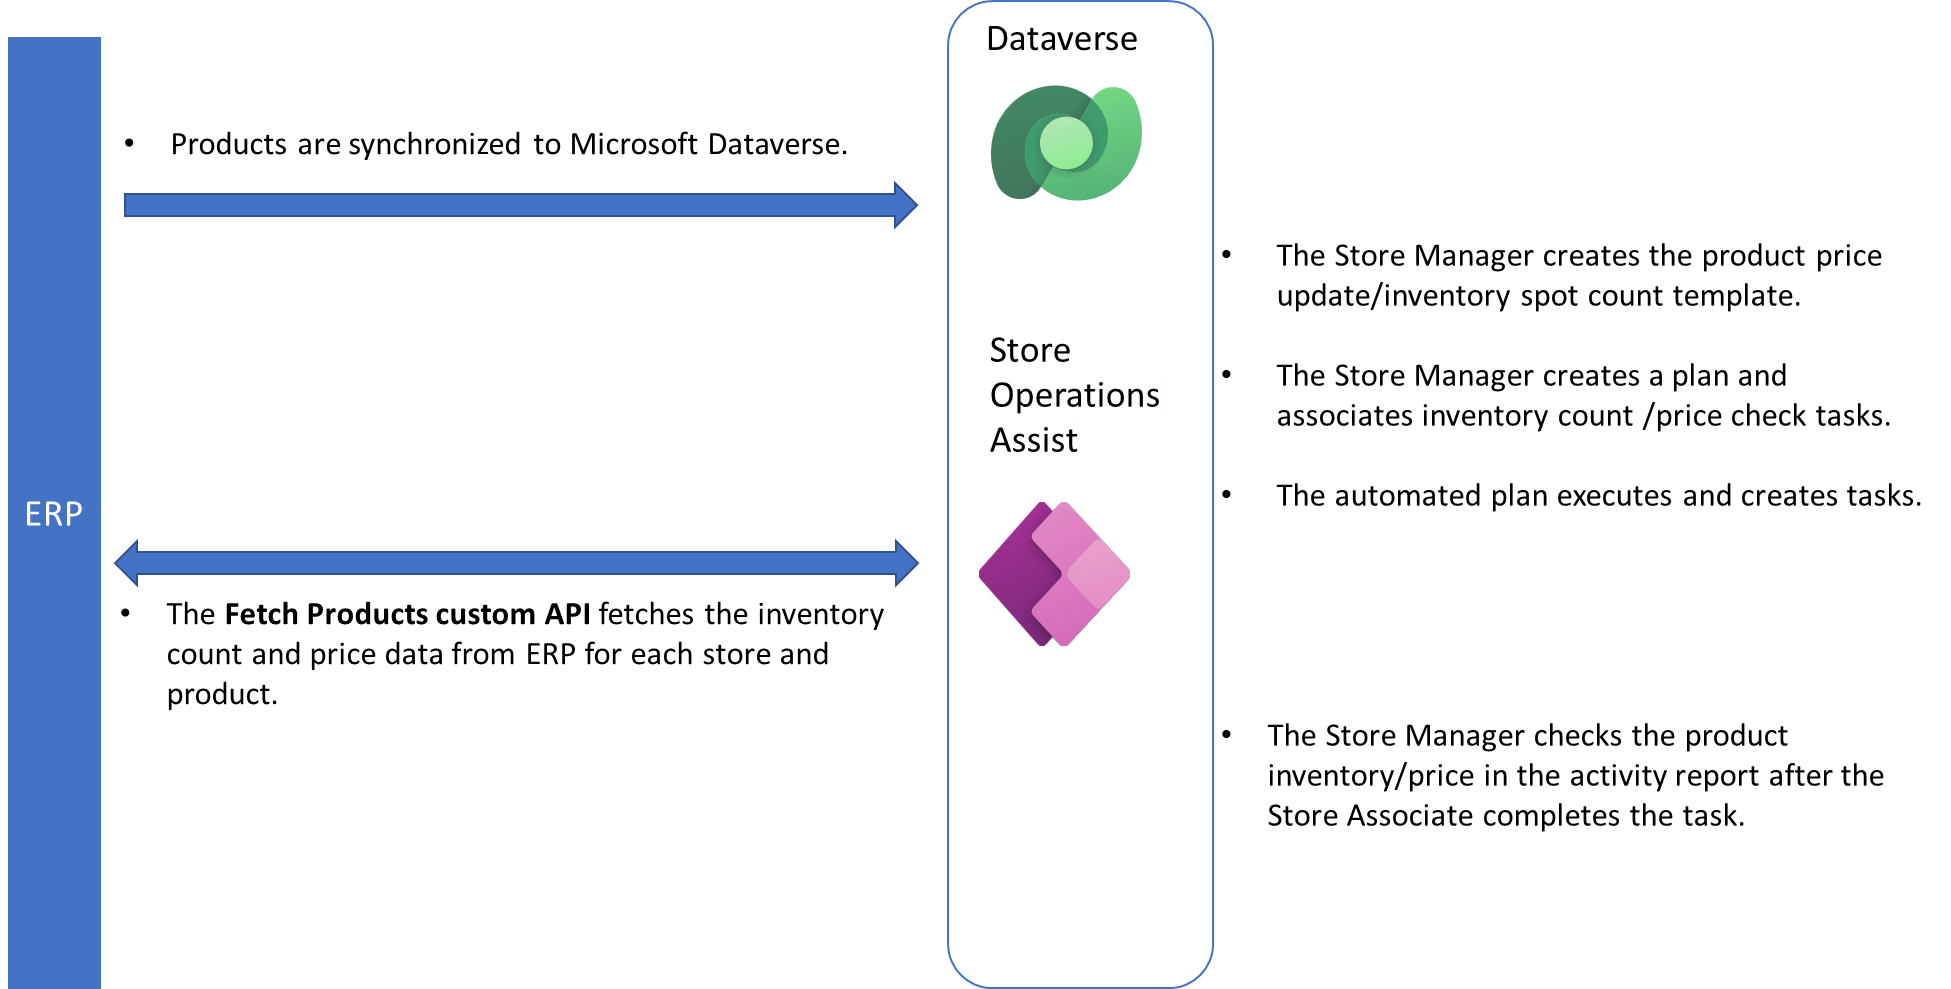 The image shows the process of using the fetch products custom API.